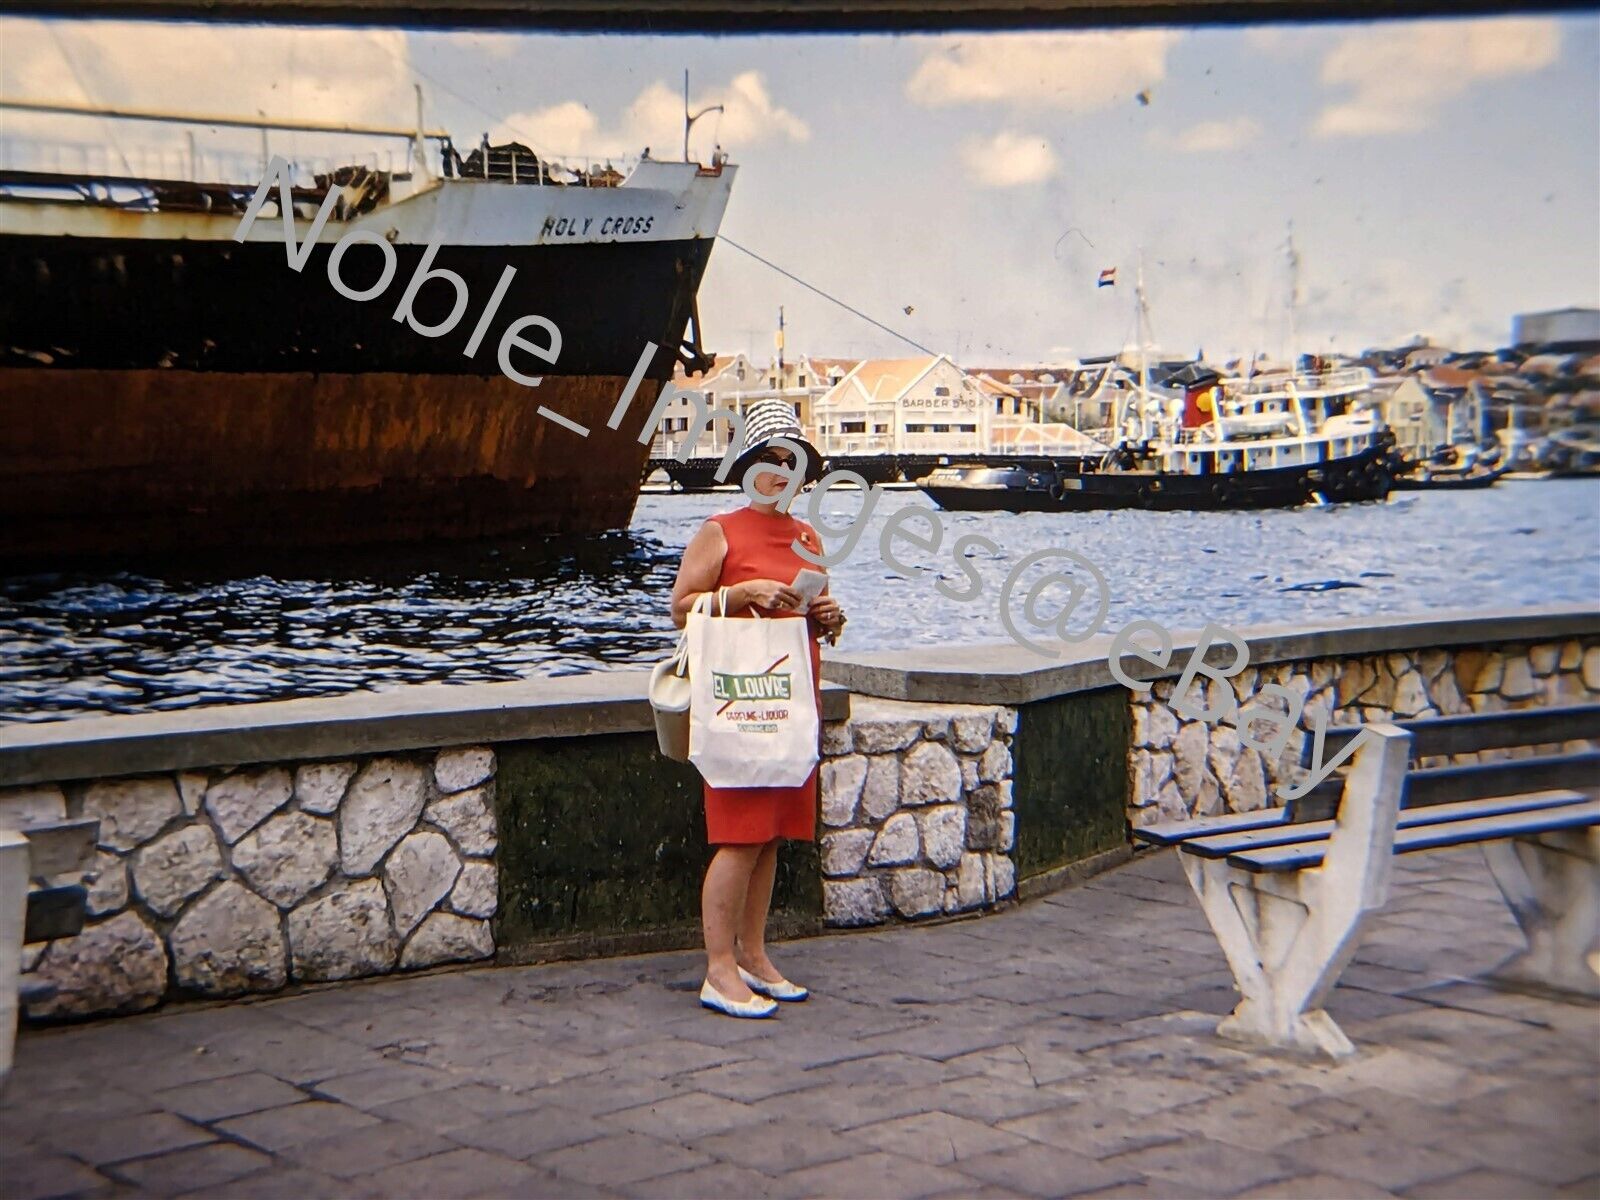 1960 Holy Cross Ship at Port in Willemstad Curacao 35mm Slide